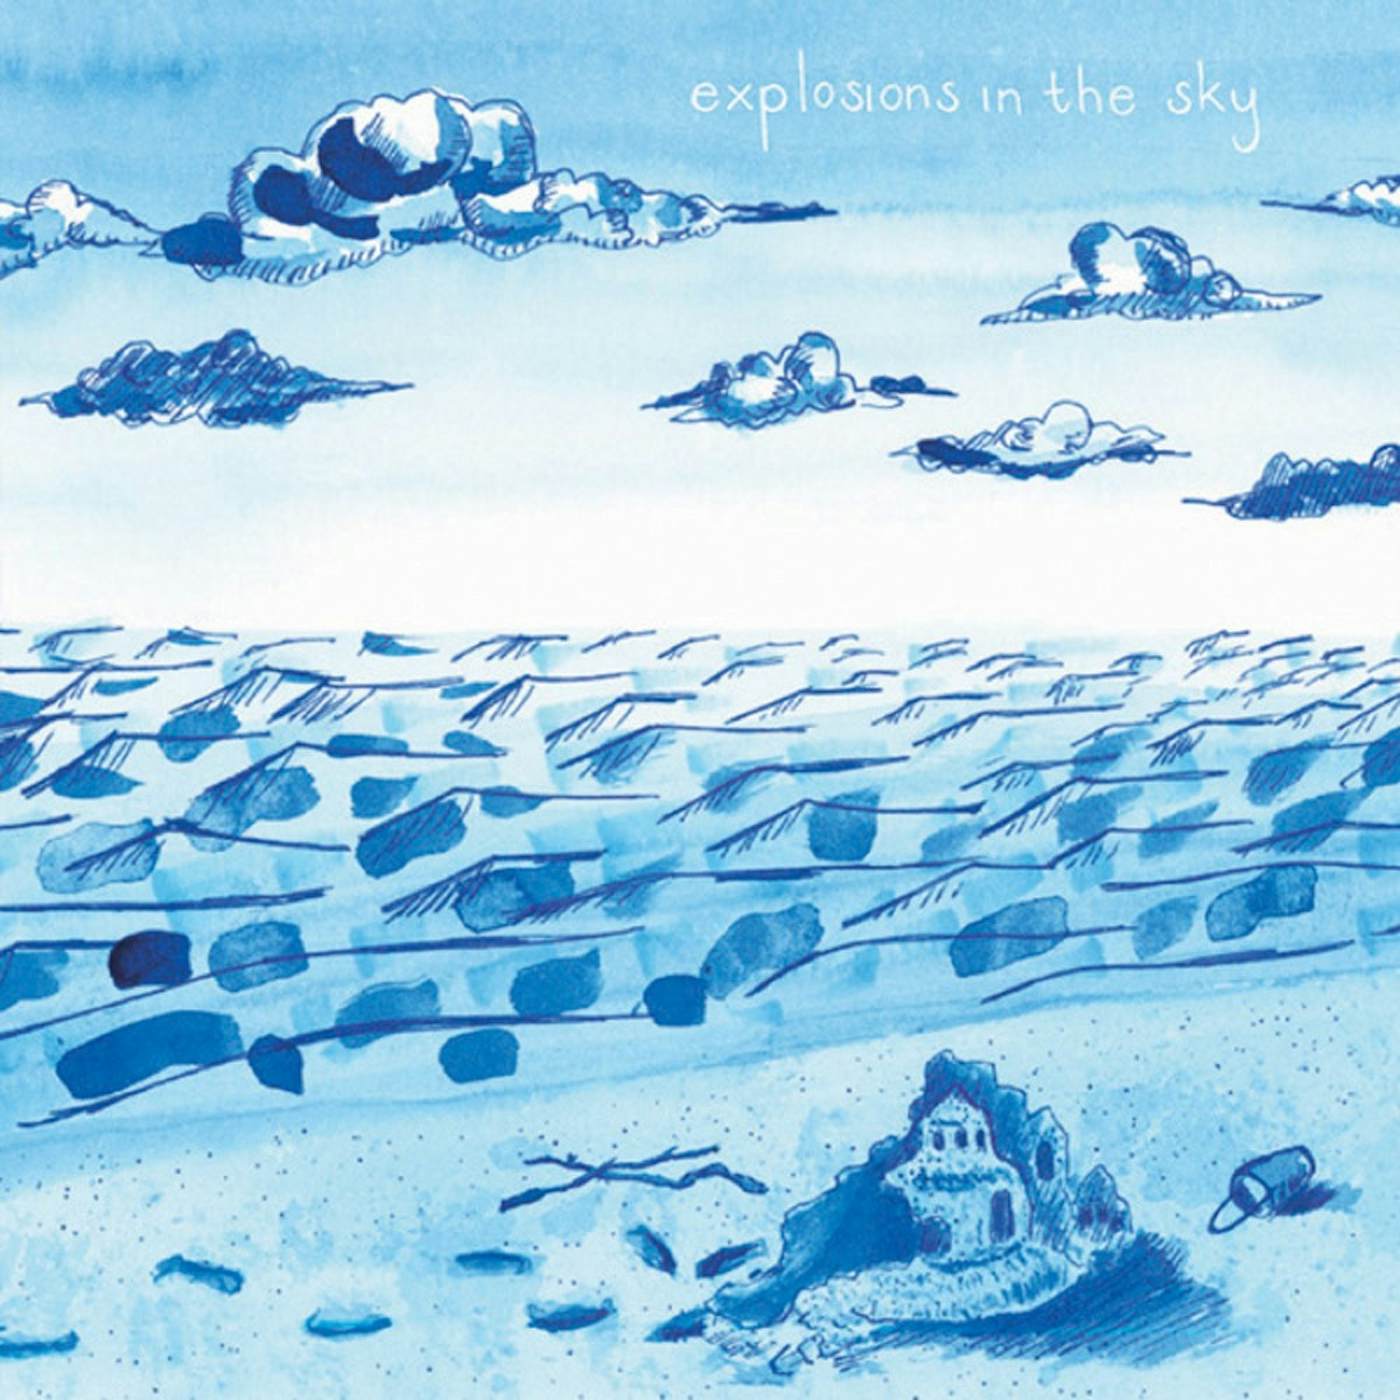 Explosions In The Sky How Strange, Innocence (Anniversary Edition) Vinyl Record